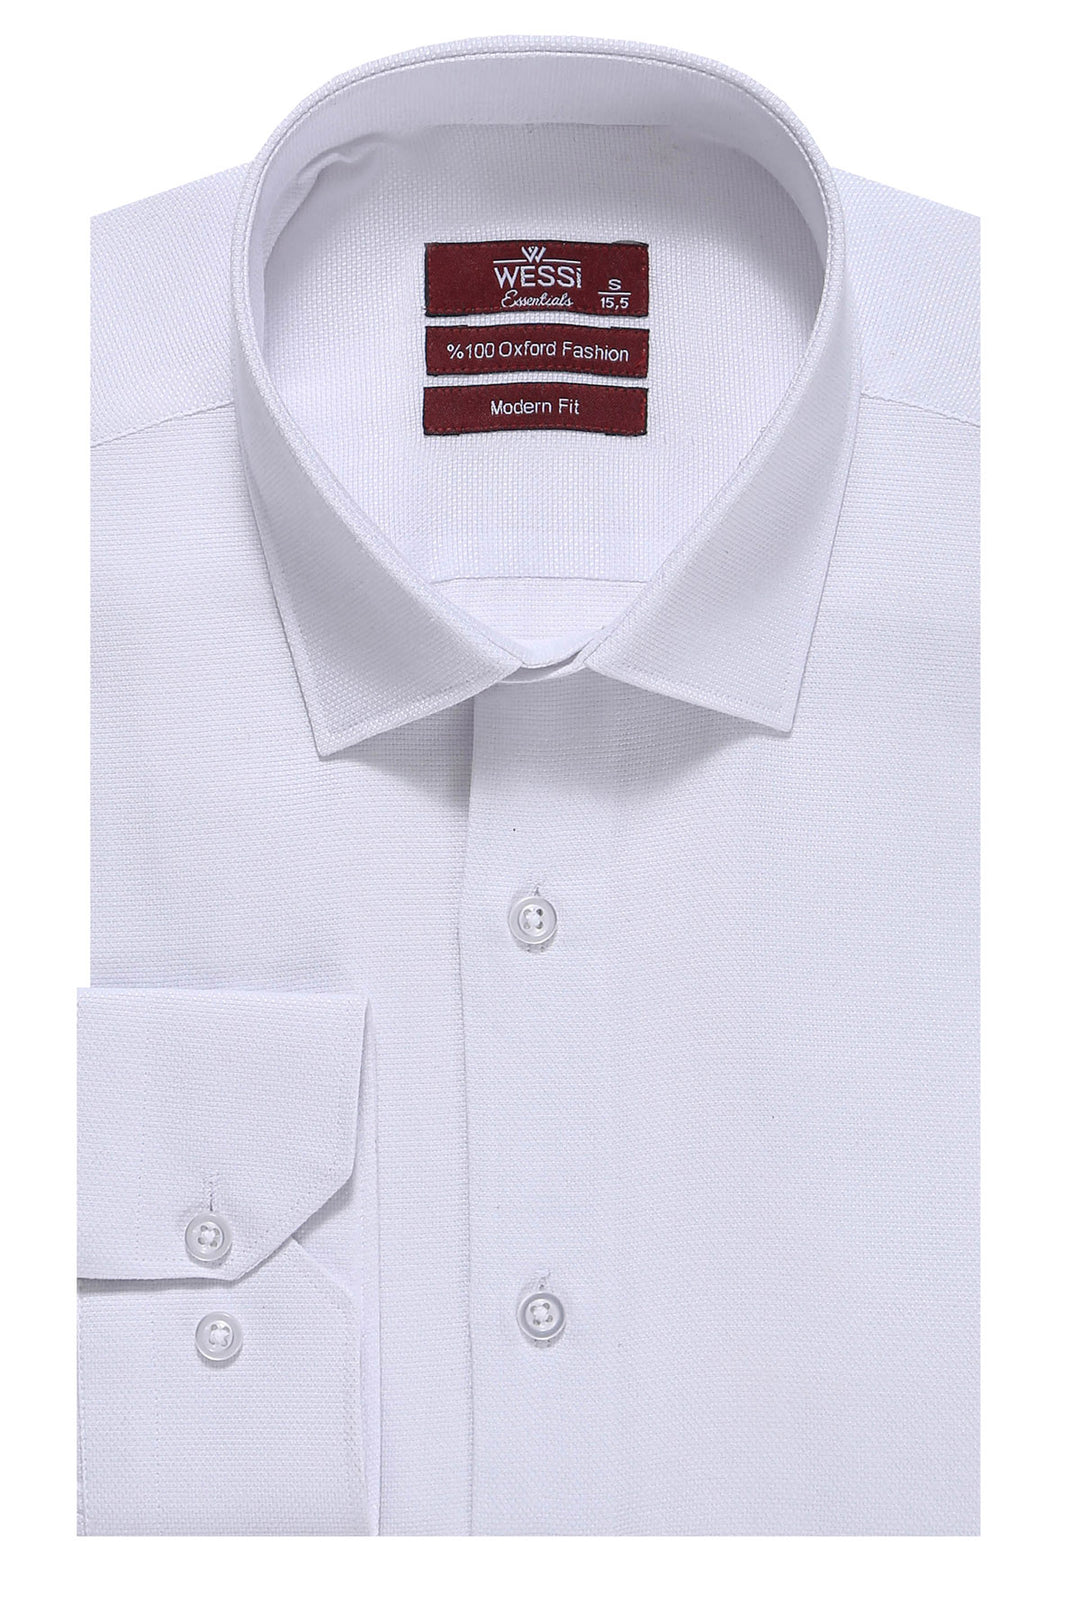 Oxford Patterned Long Sleeves Slim Fit White Men Shirt - Wessi